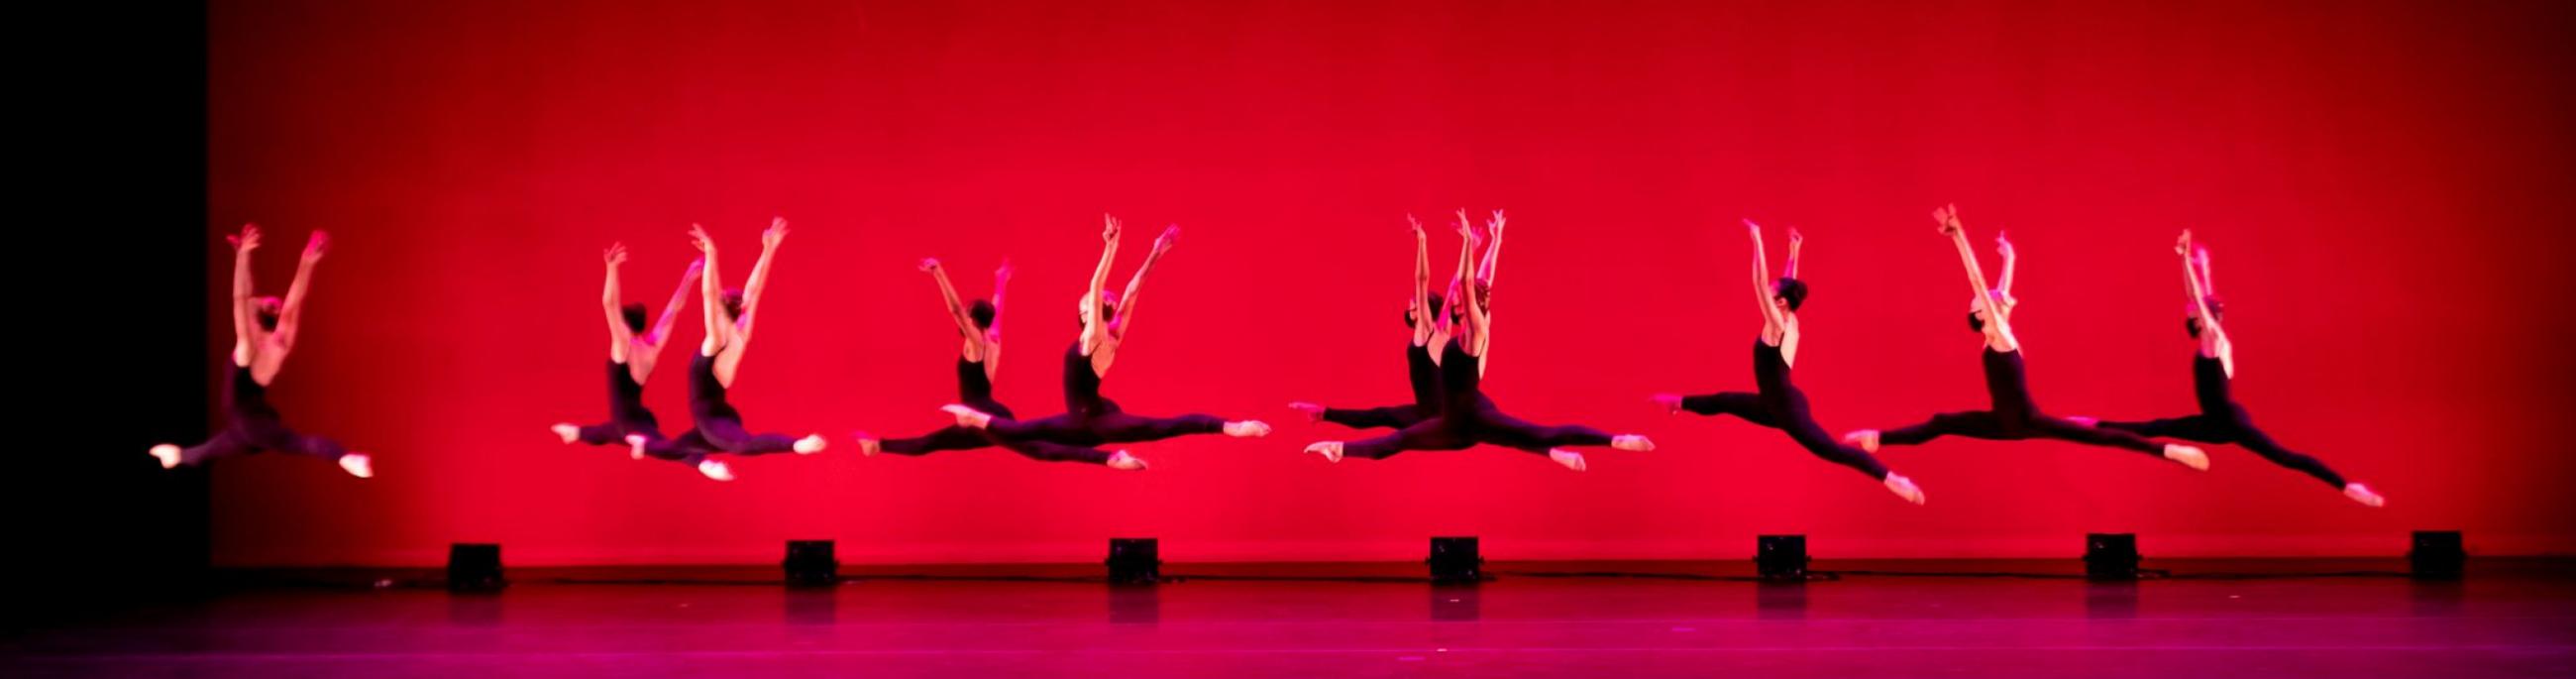 A row of ballet dancers wearing black costumes leap in front of a red background.